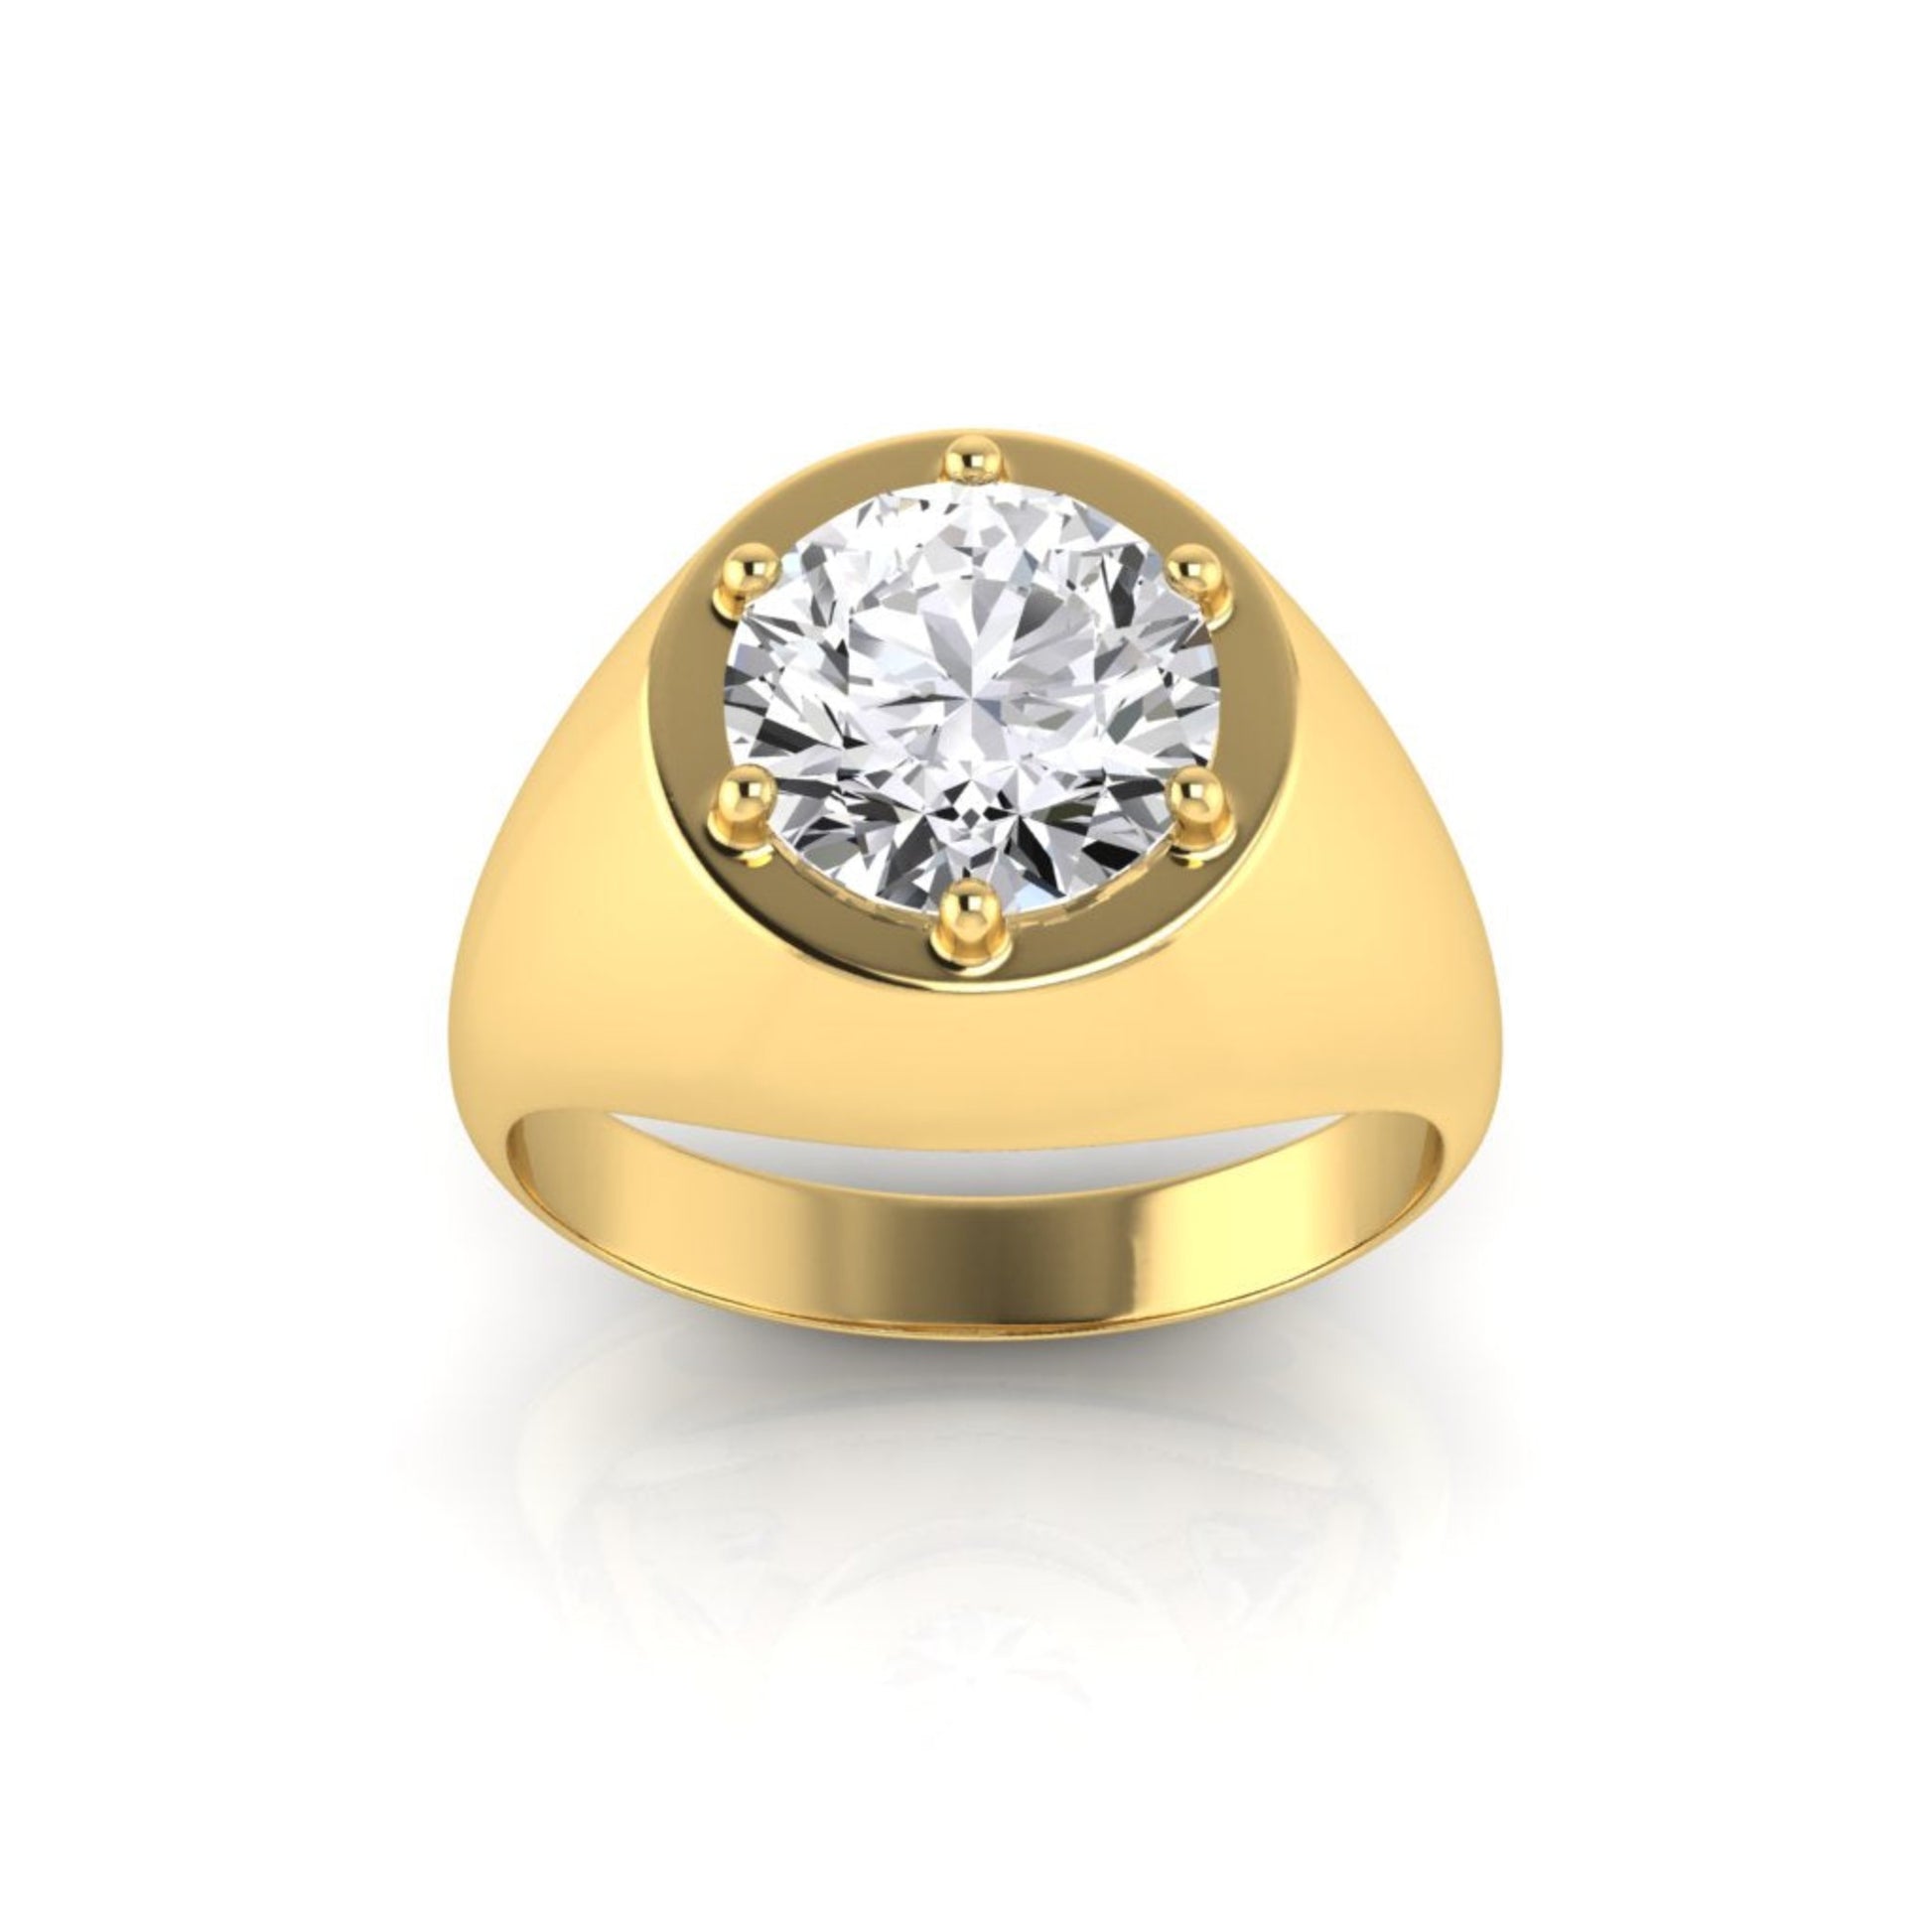 Betty Solitaire Diamond 6 Claw Signet Ring